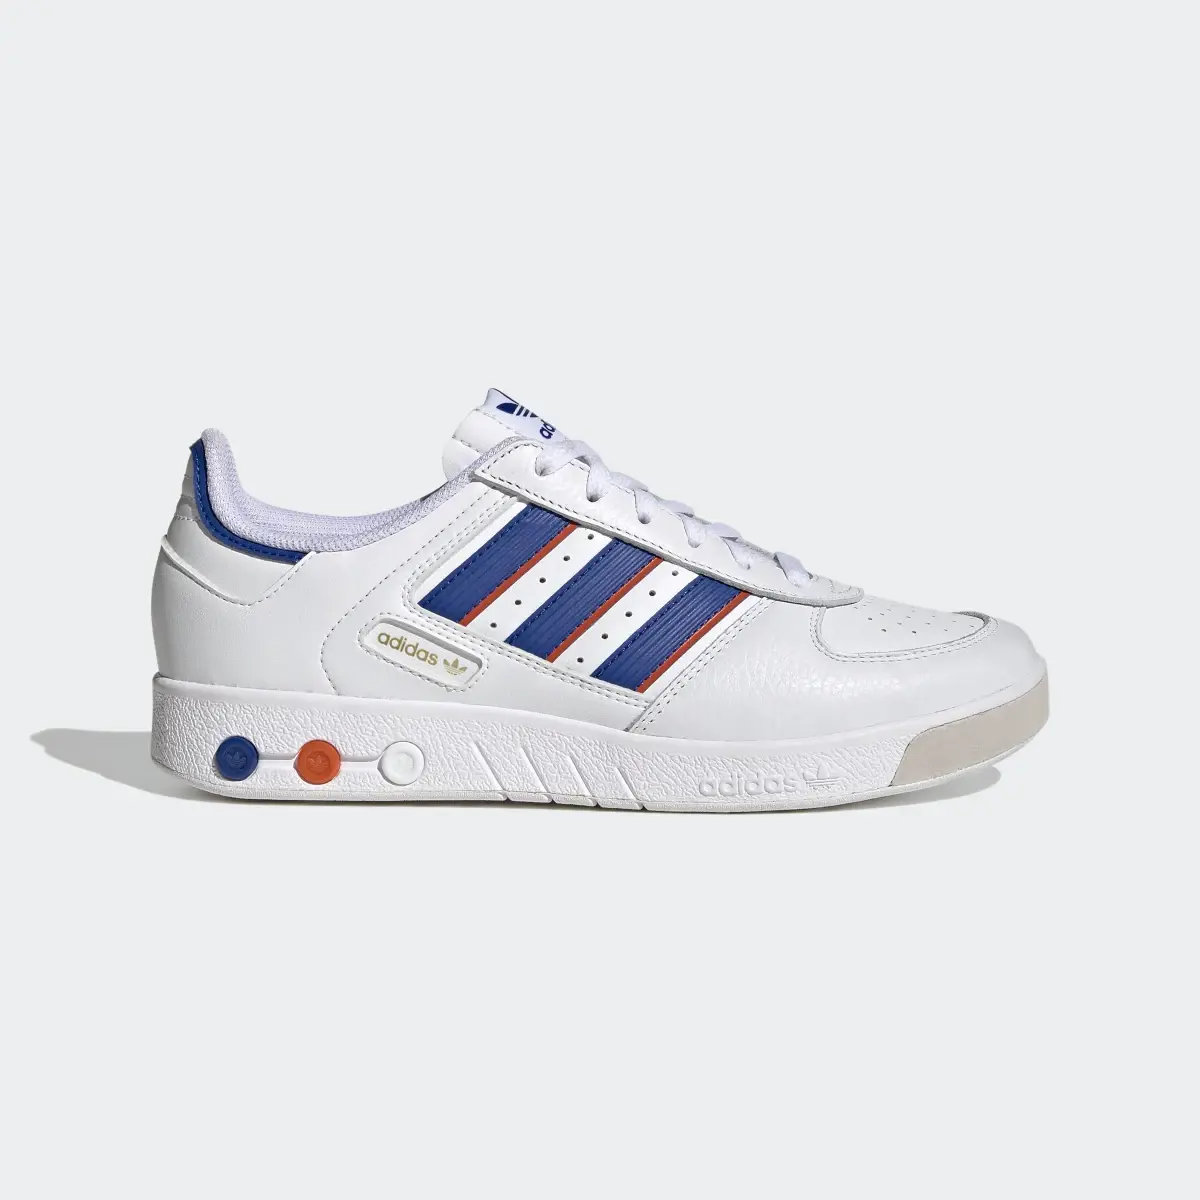 Adidas G.S. Court Shoes. 2